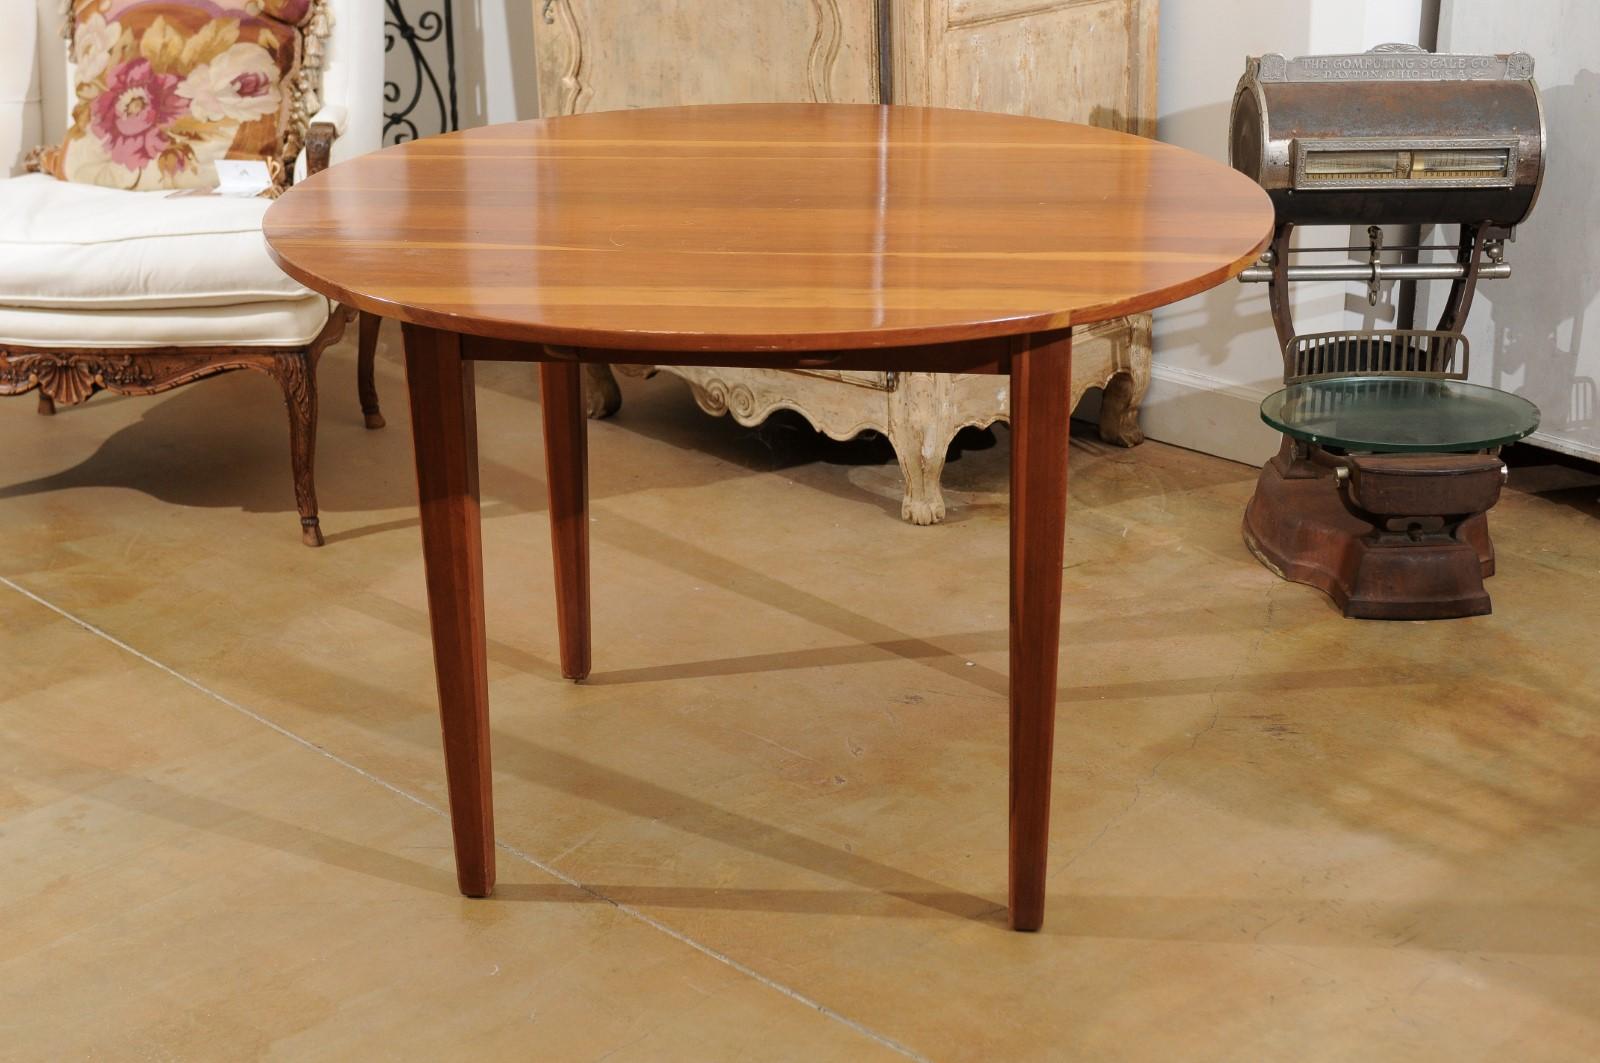 20th Century American Cherry Round Top Dining Table with Tapered Legs and Square Apron